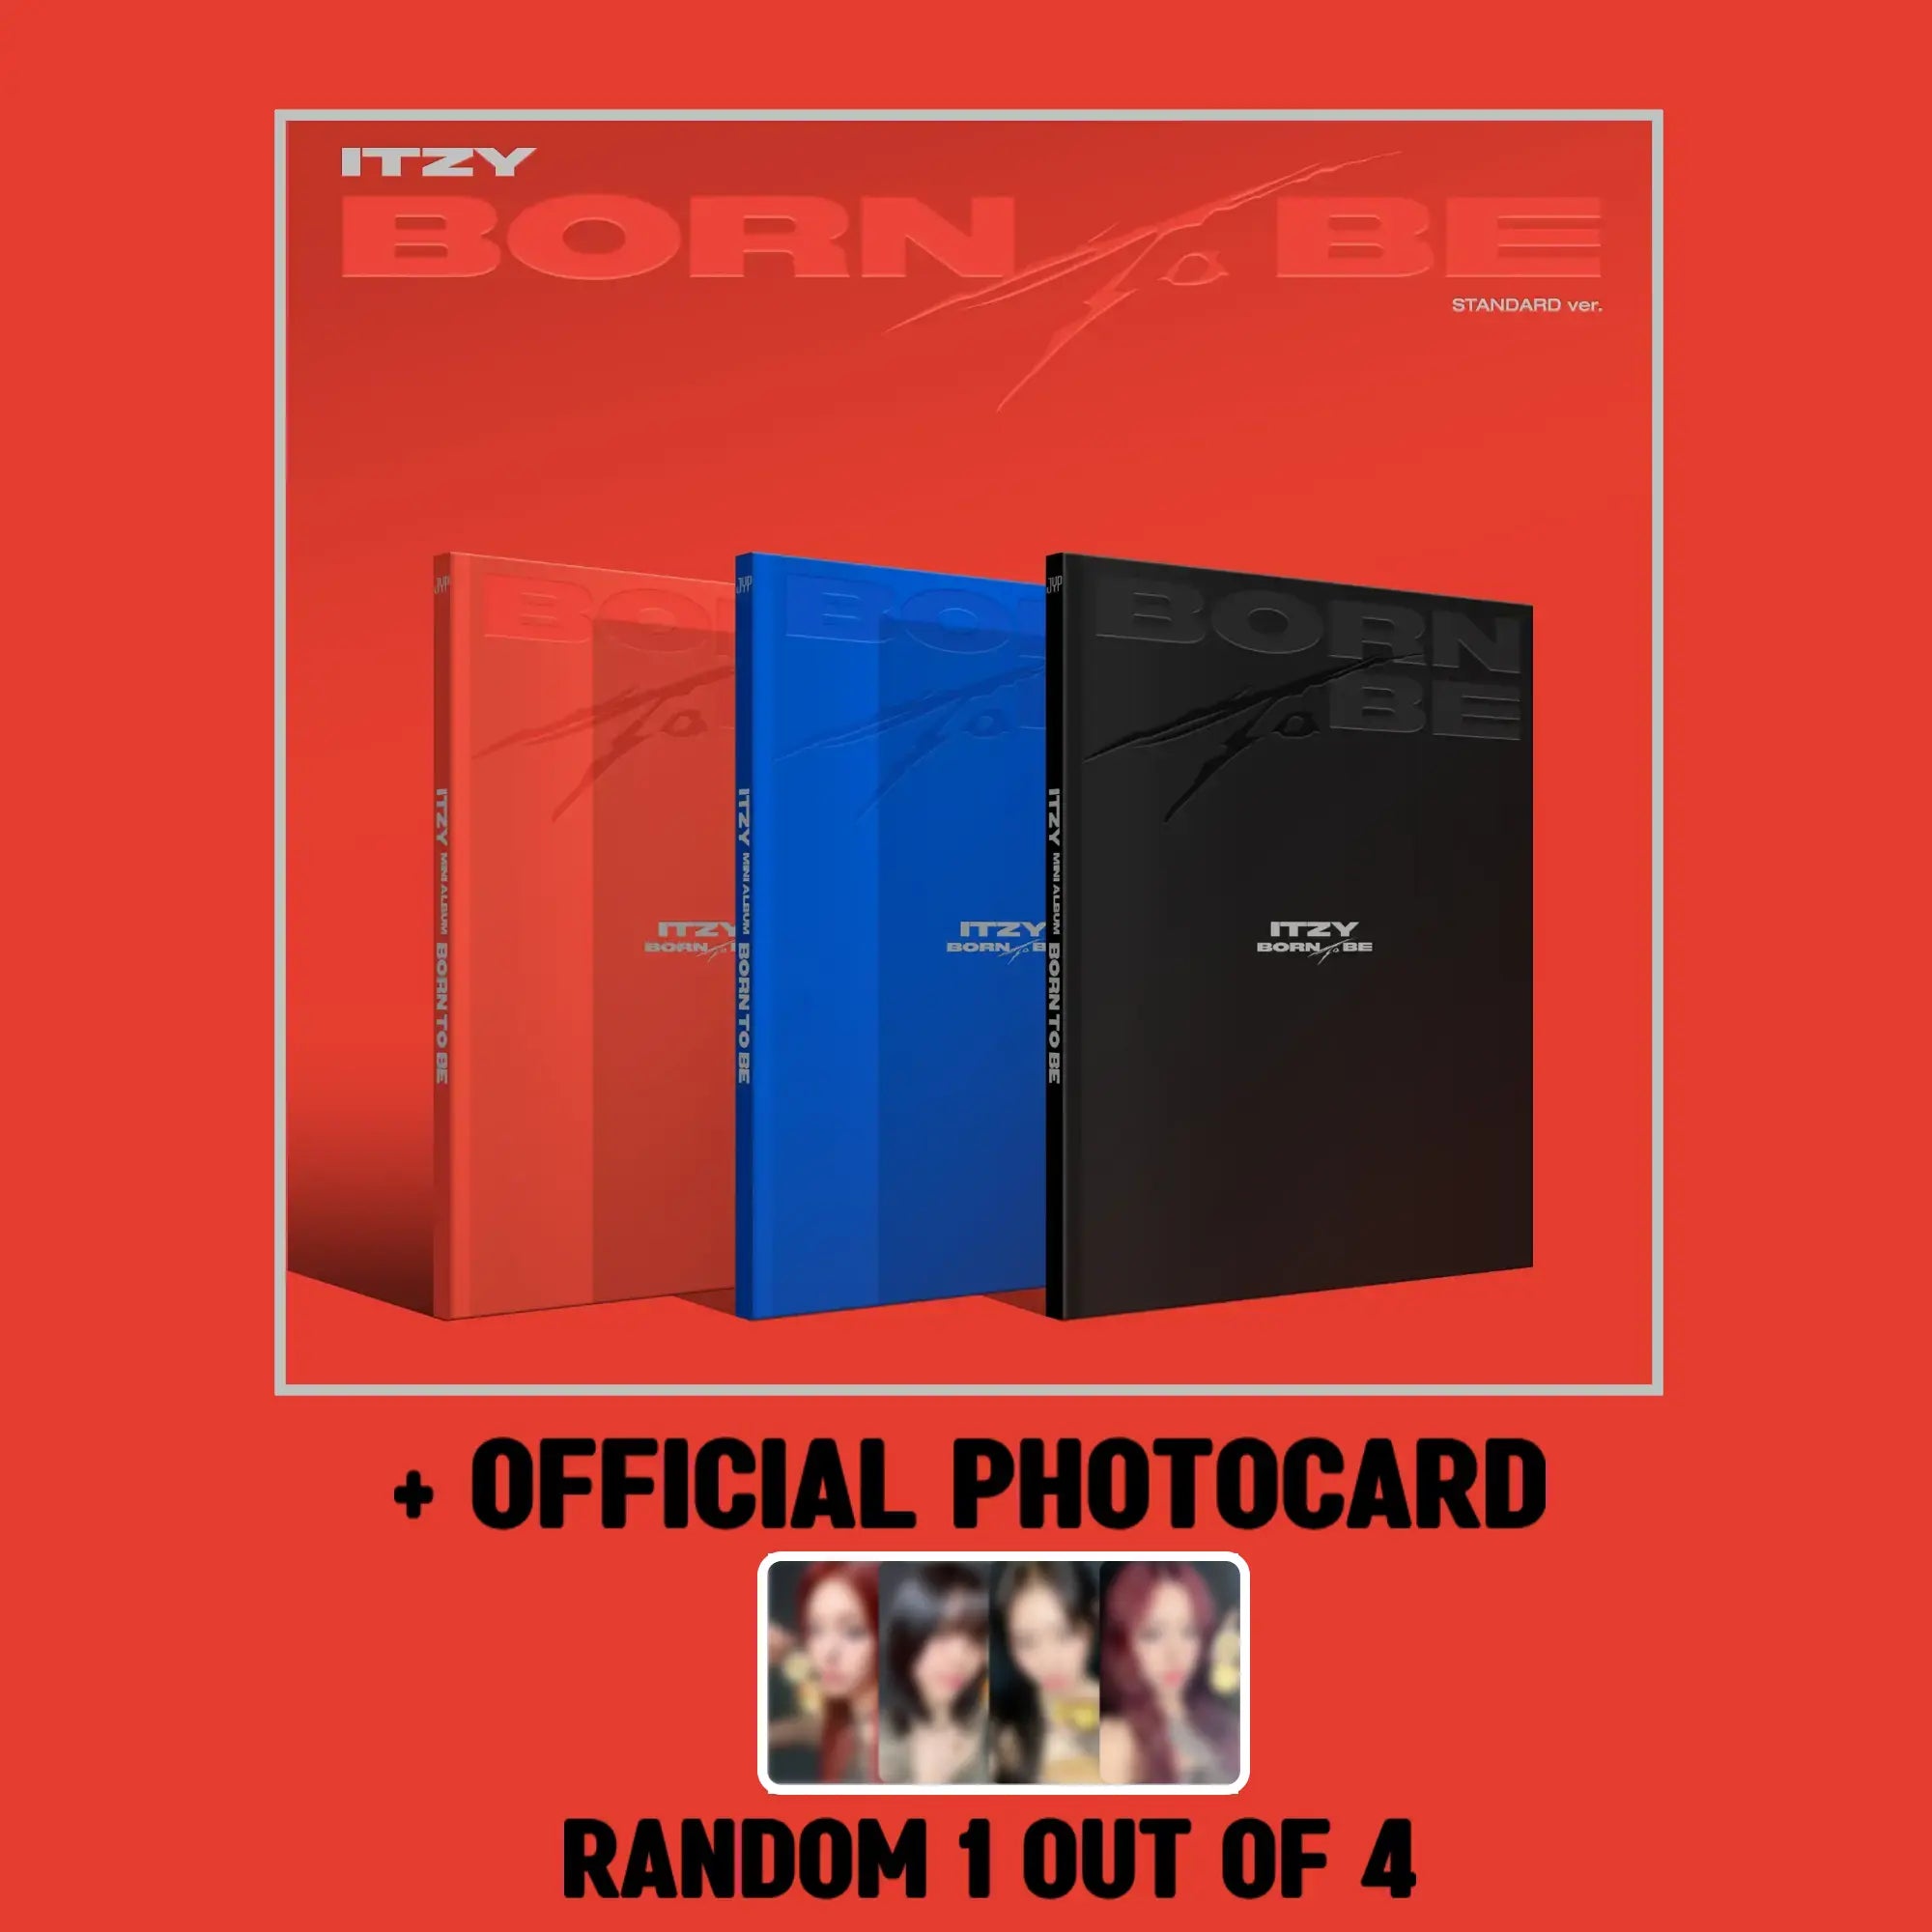 ITZY Album - BORN TO BE (Limited Ver.)